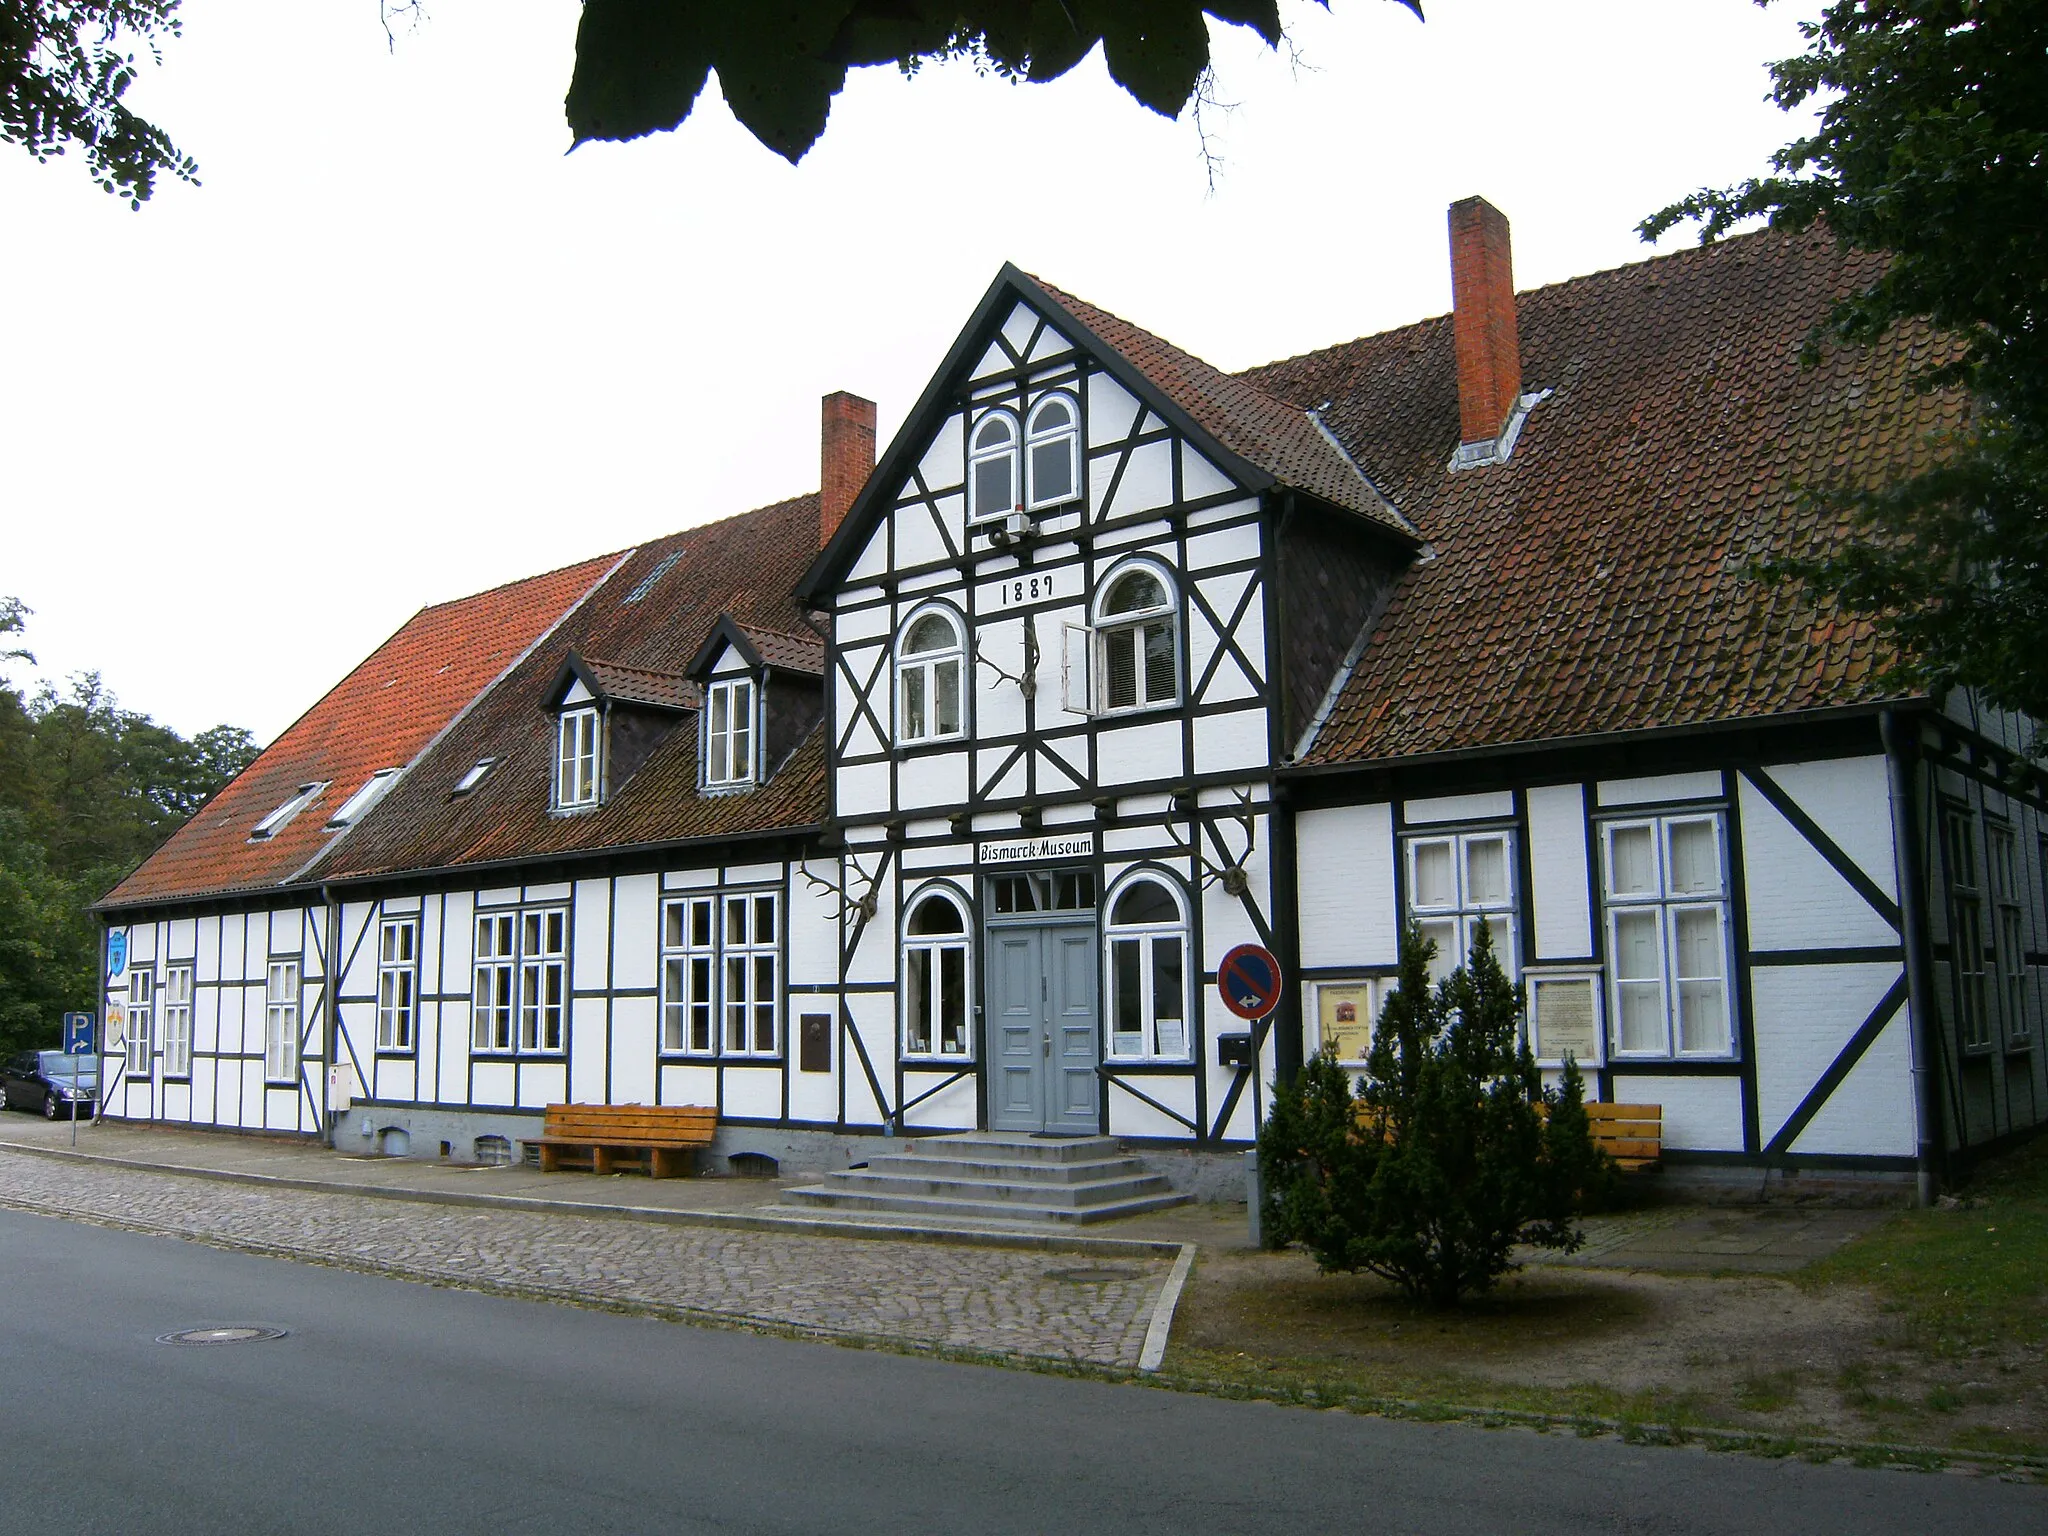 Photo showing: The Bismarck-Museum in Friedrichsruh, east of Hamburg, Germany, in the Altes Landhaus (old house).